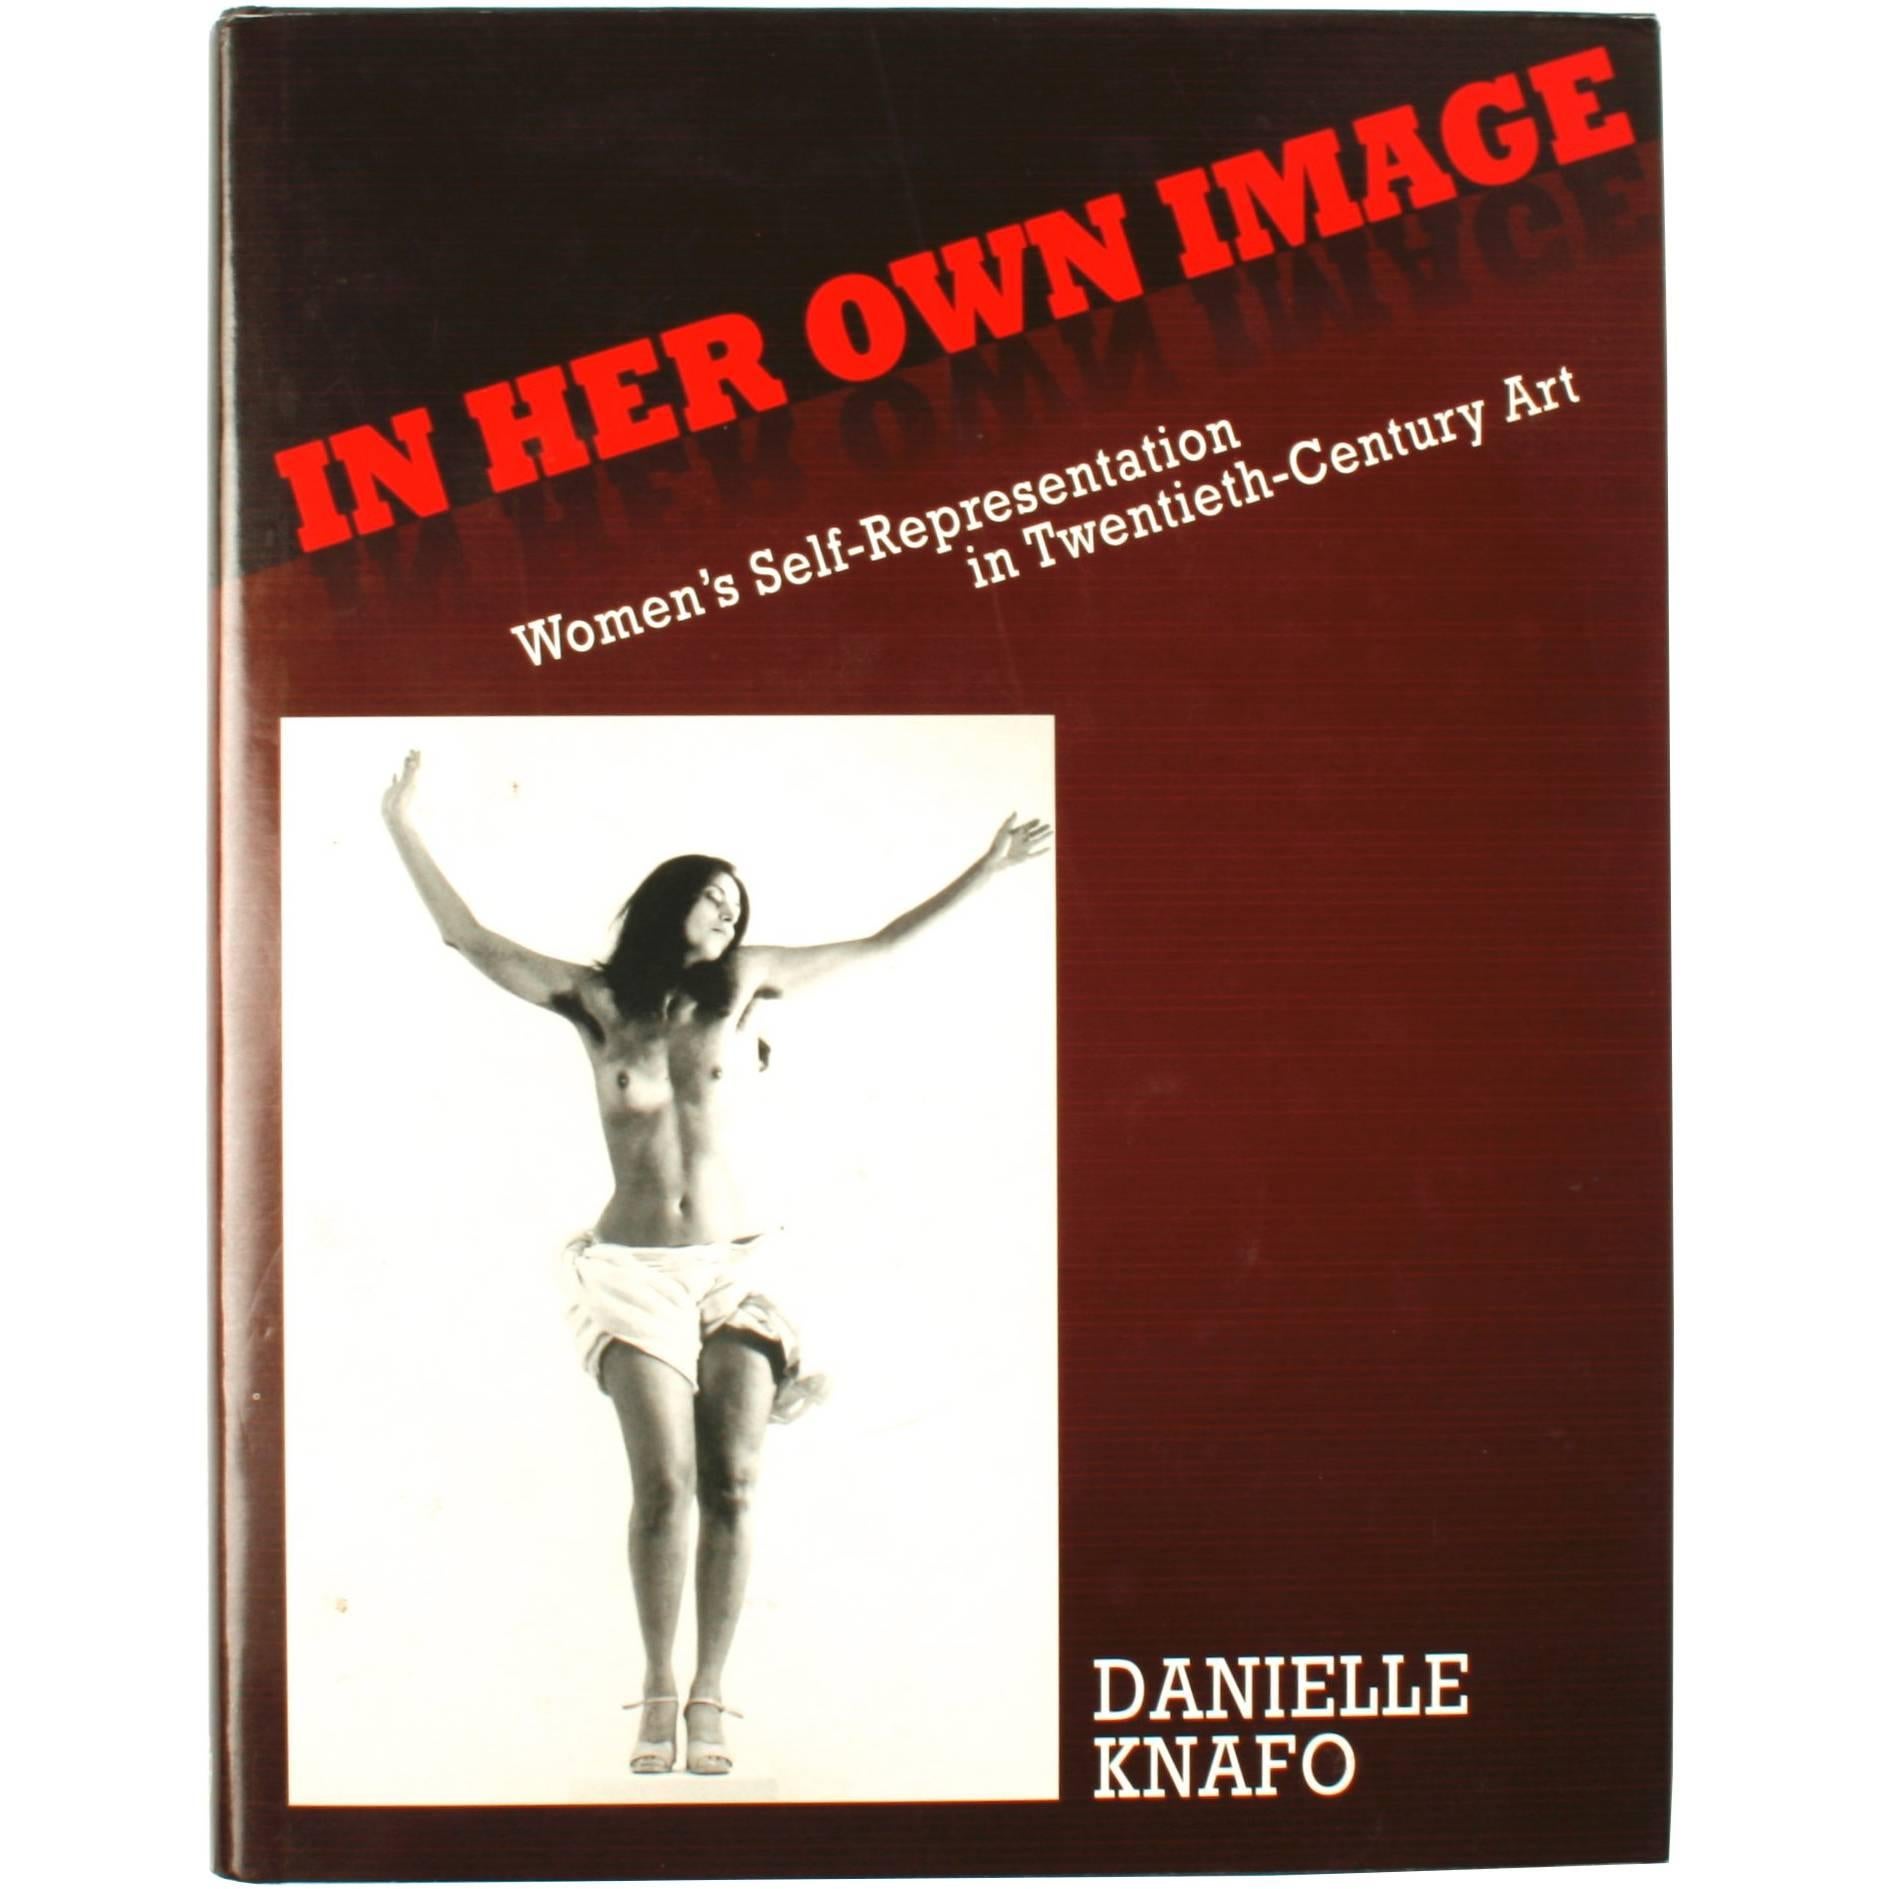 In Her Own Image (In Her Own Image) de Daniele Knafo, signée première édition